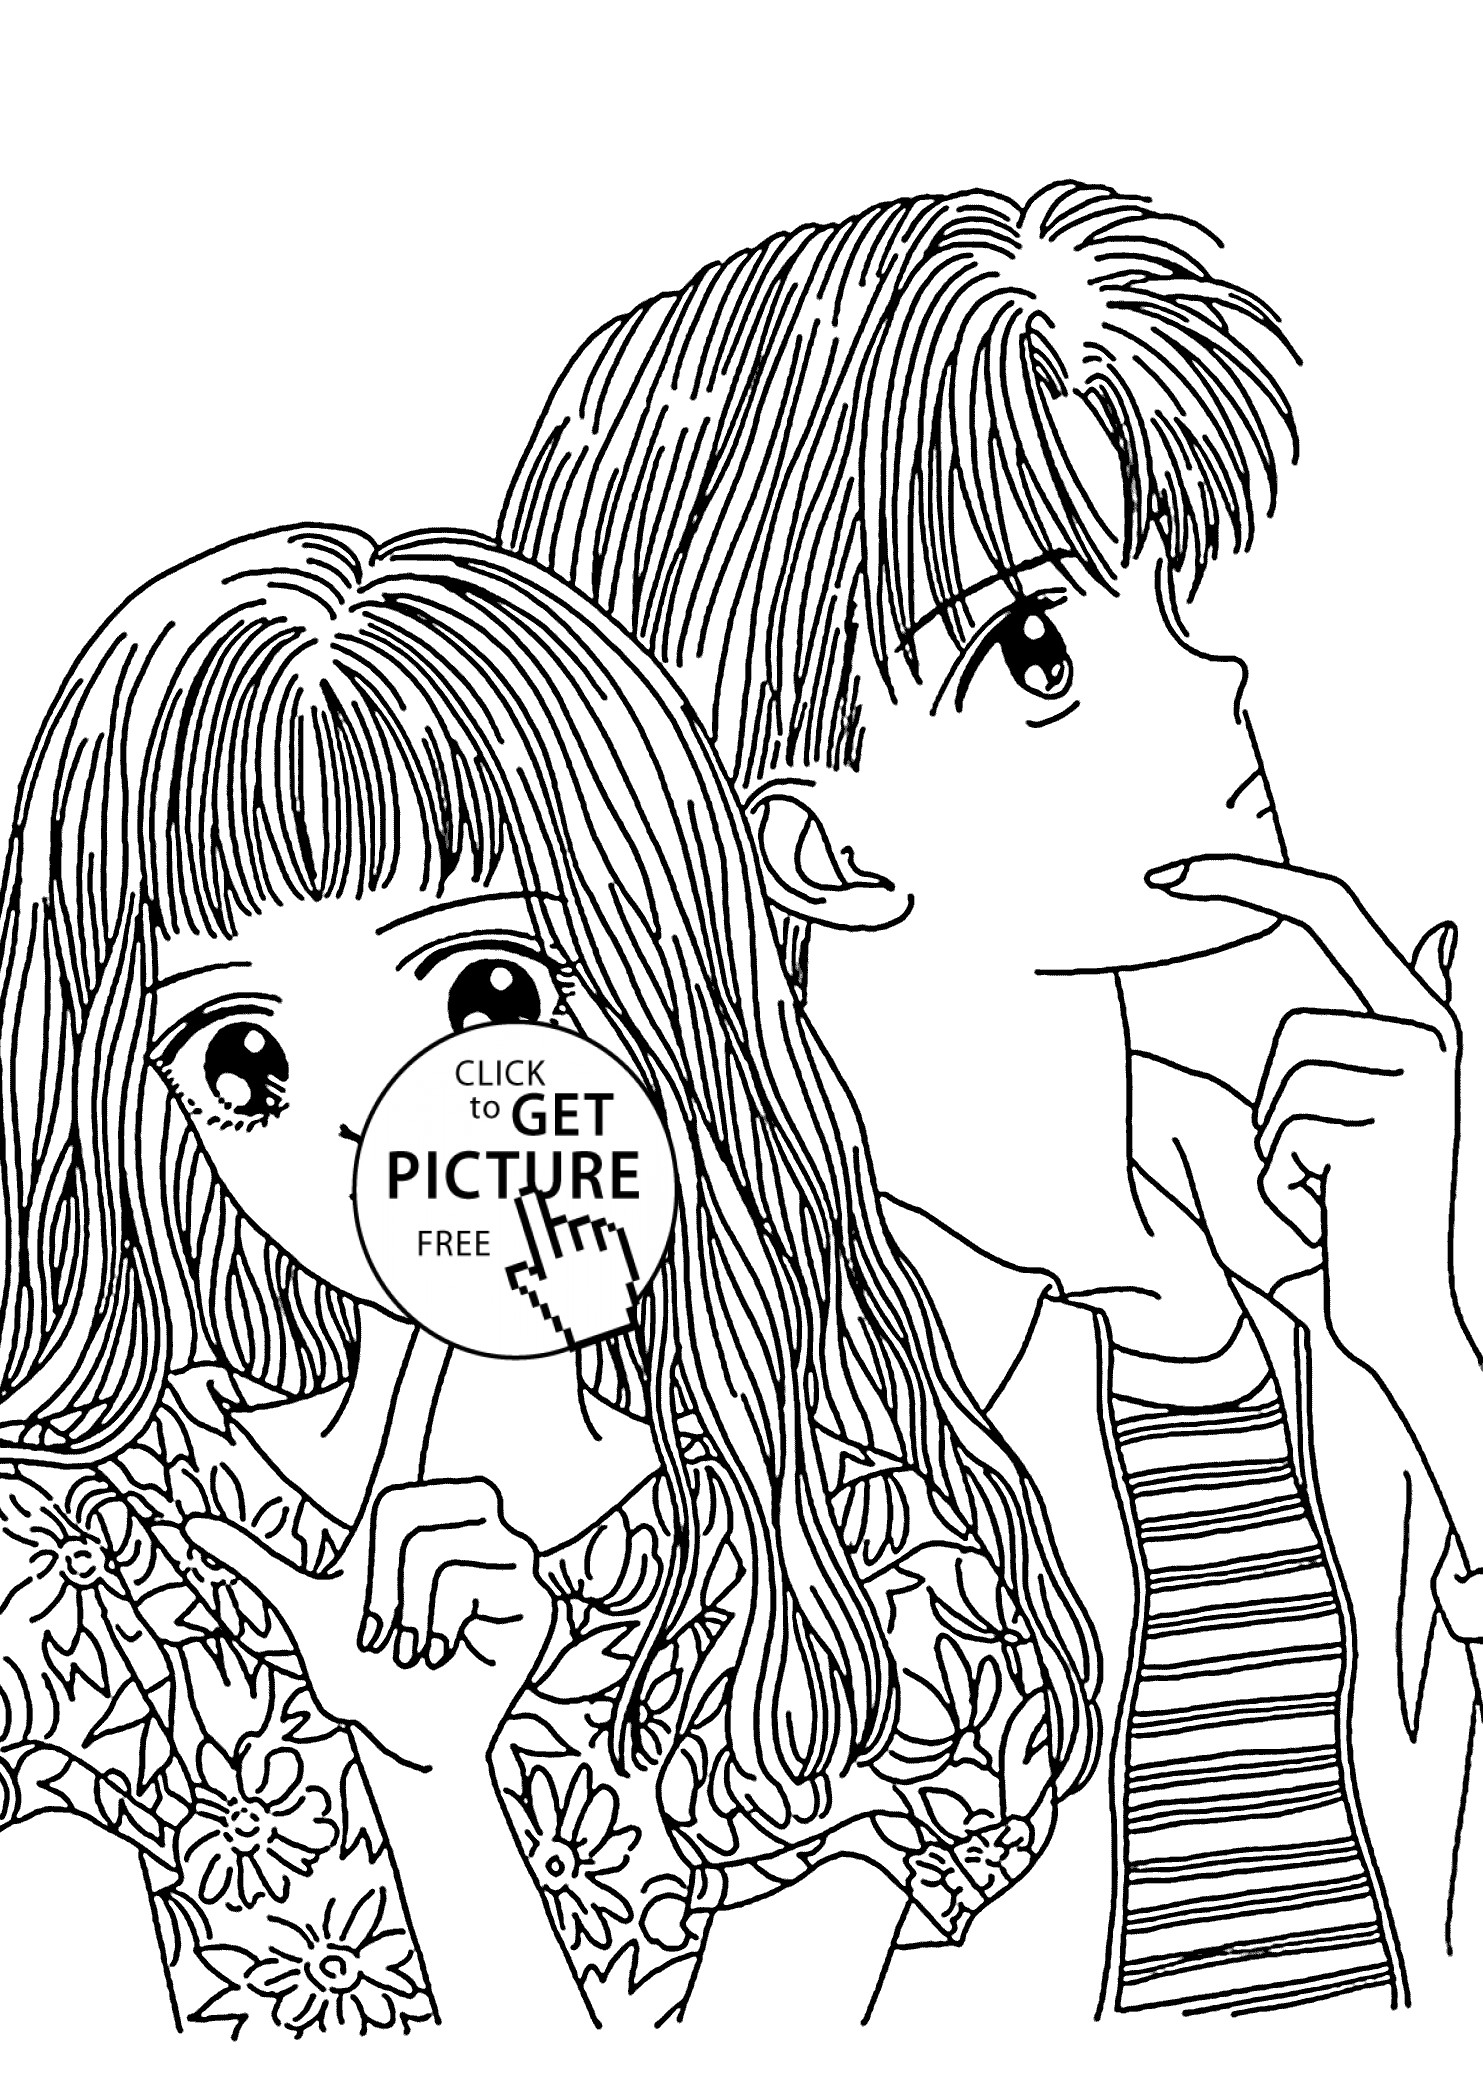 Anime Girl And Boy Coloring Pages
 Marmalade boy coloring pages for kids printable free